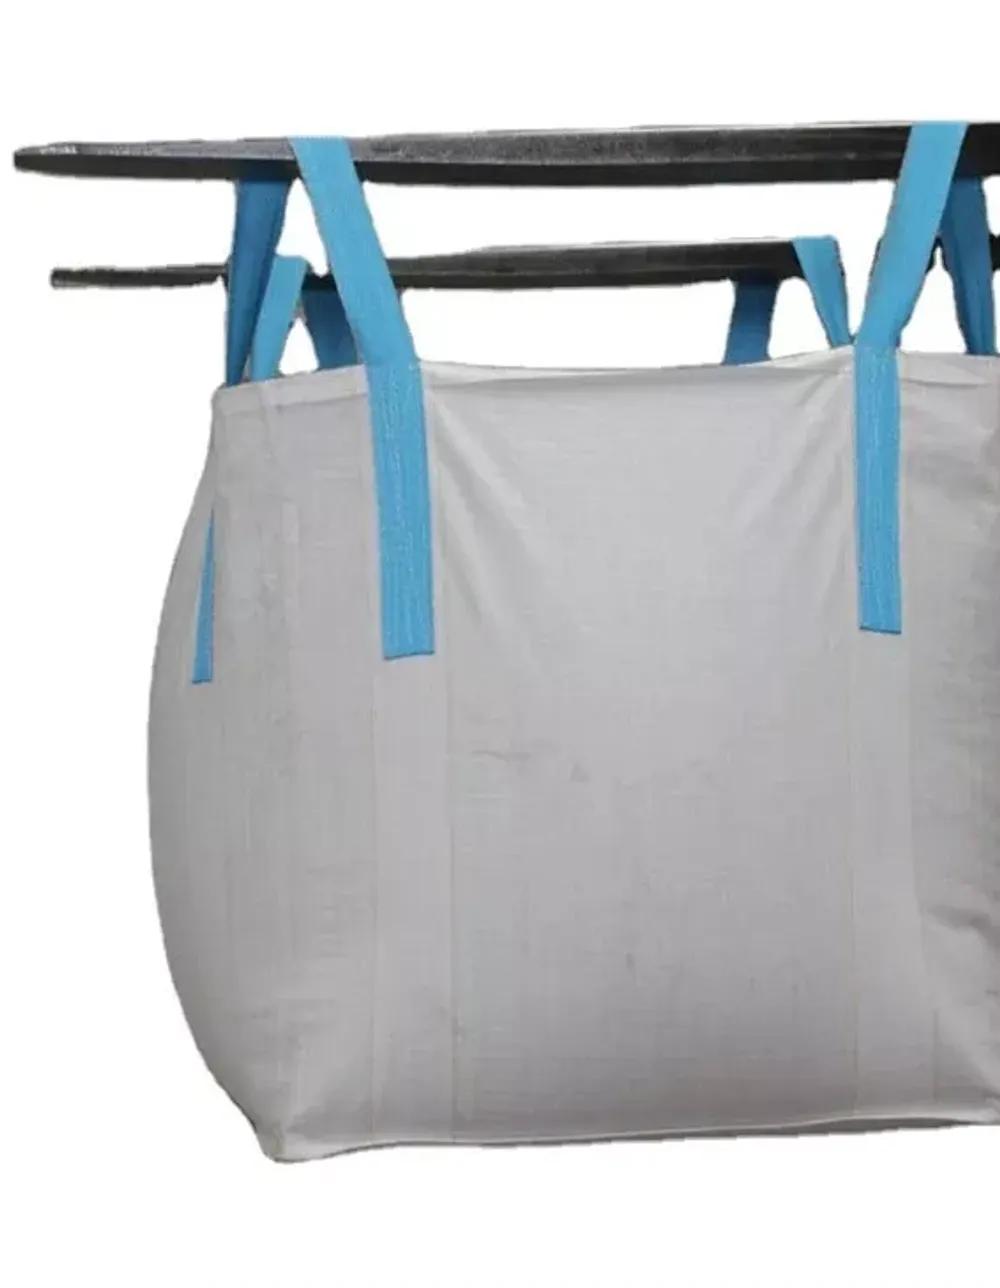 Large jumbo bags for industrial